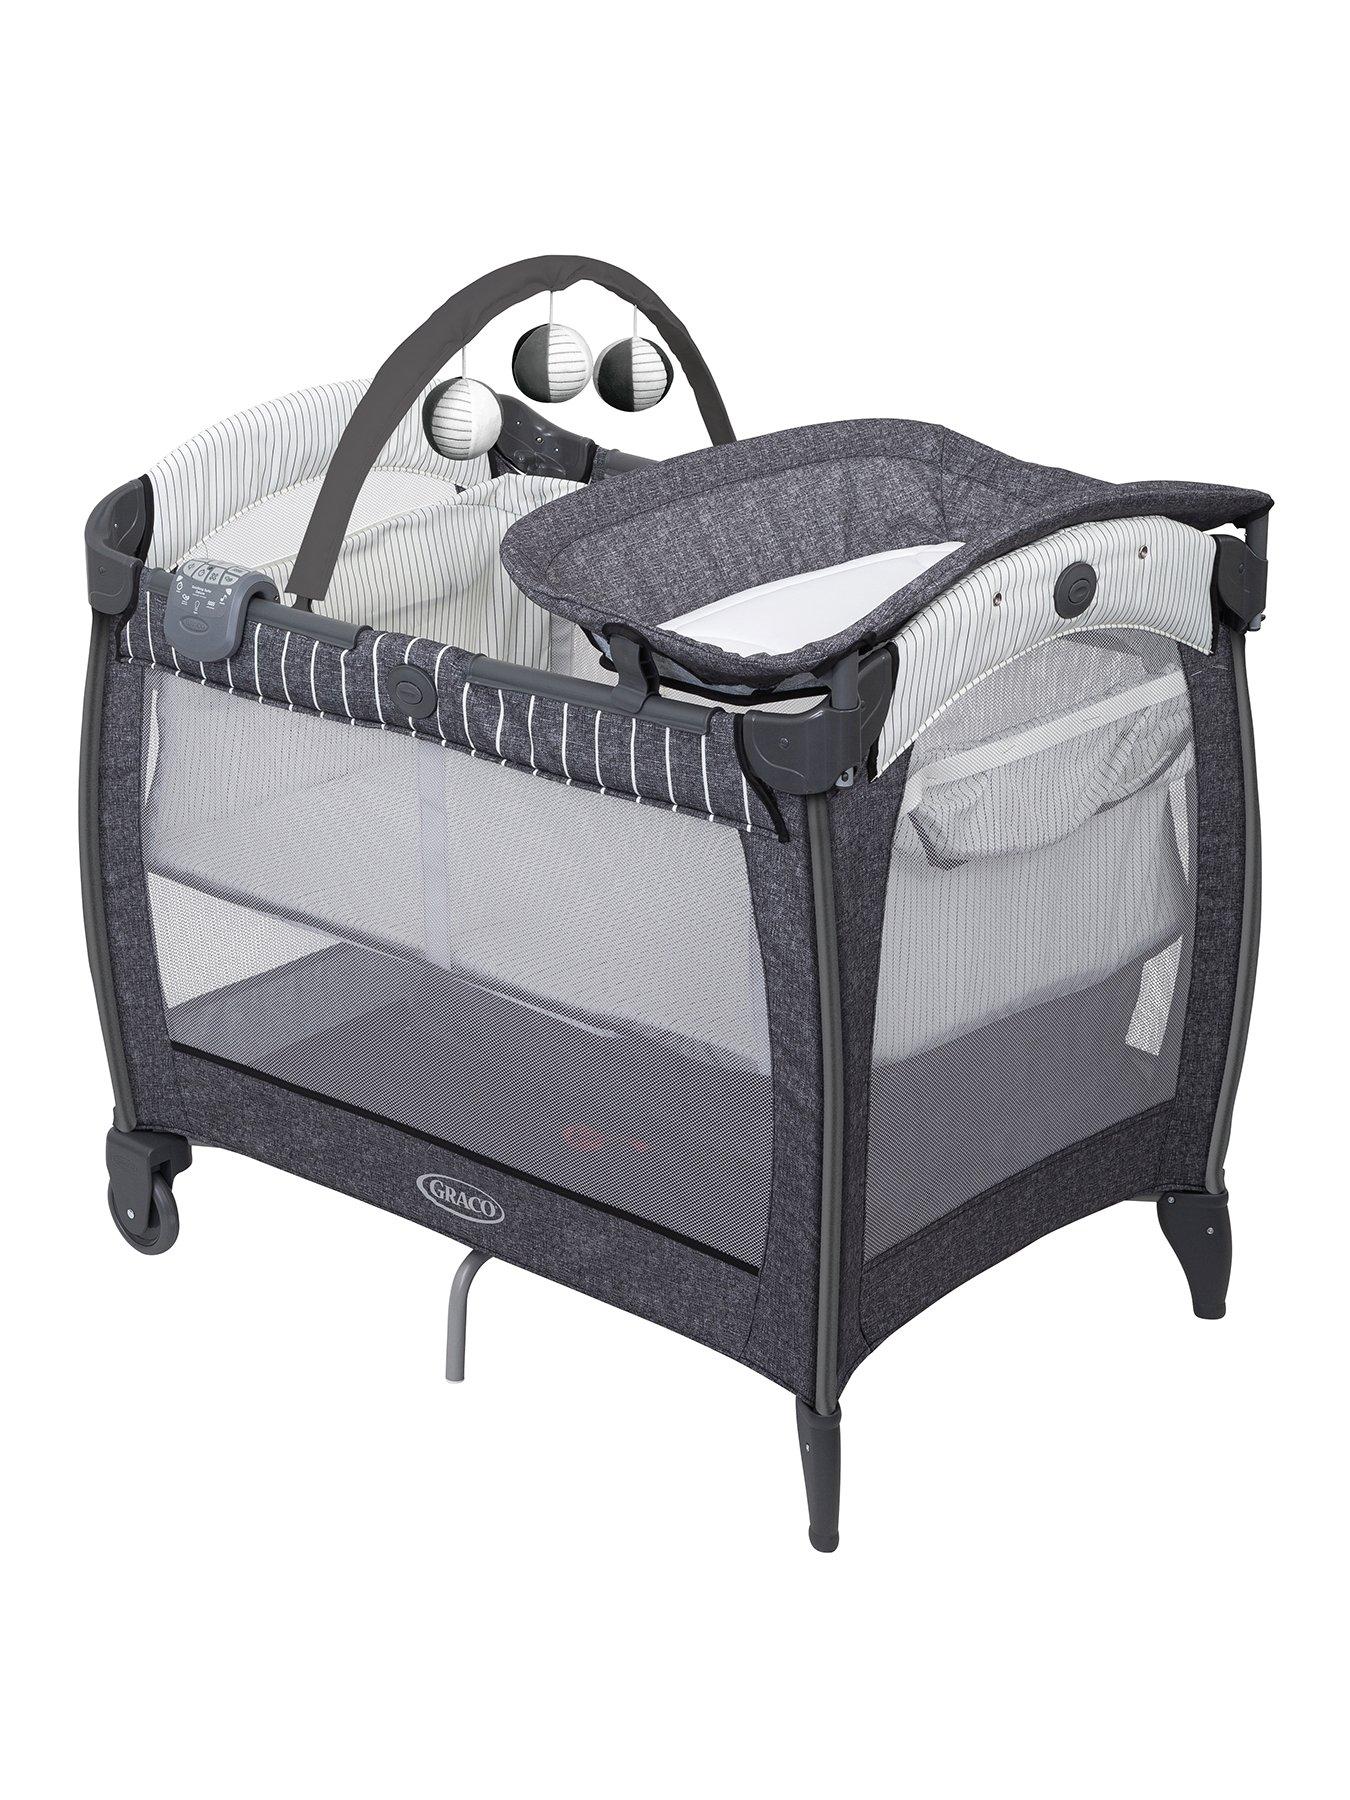 graco cot bed